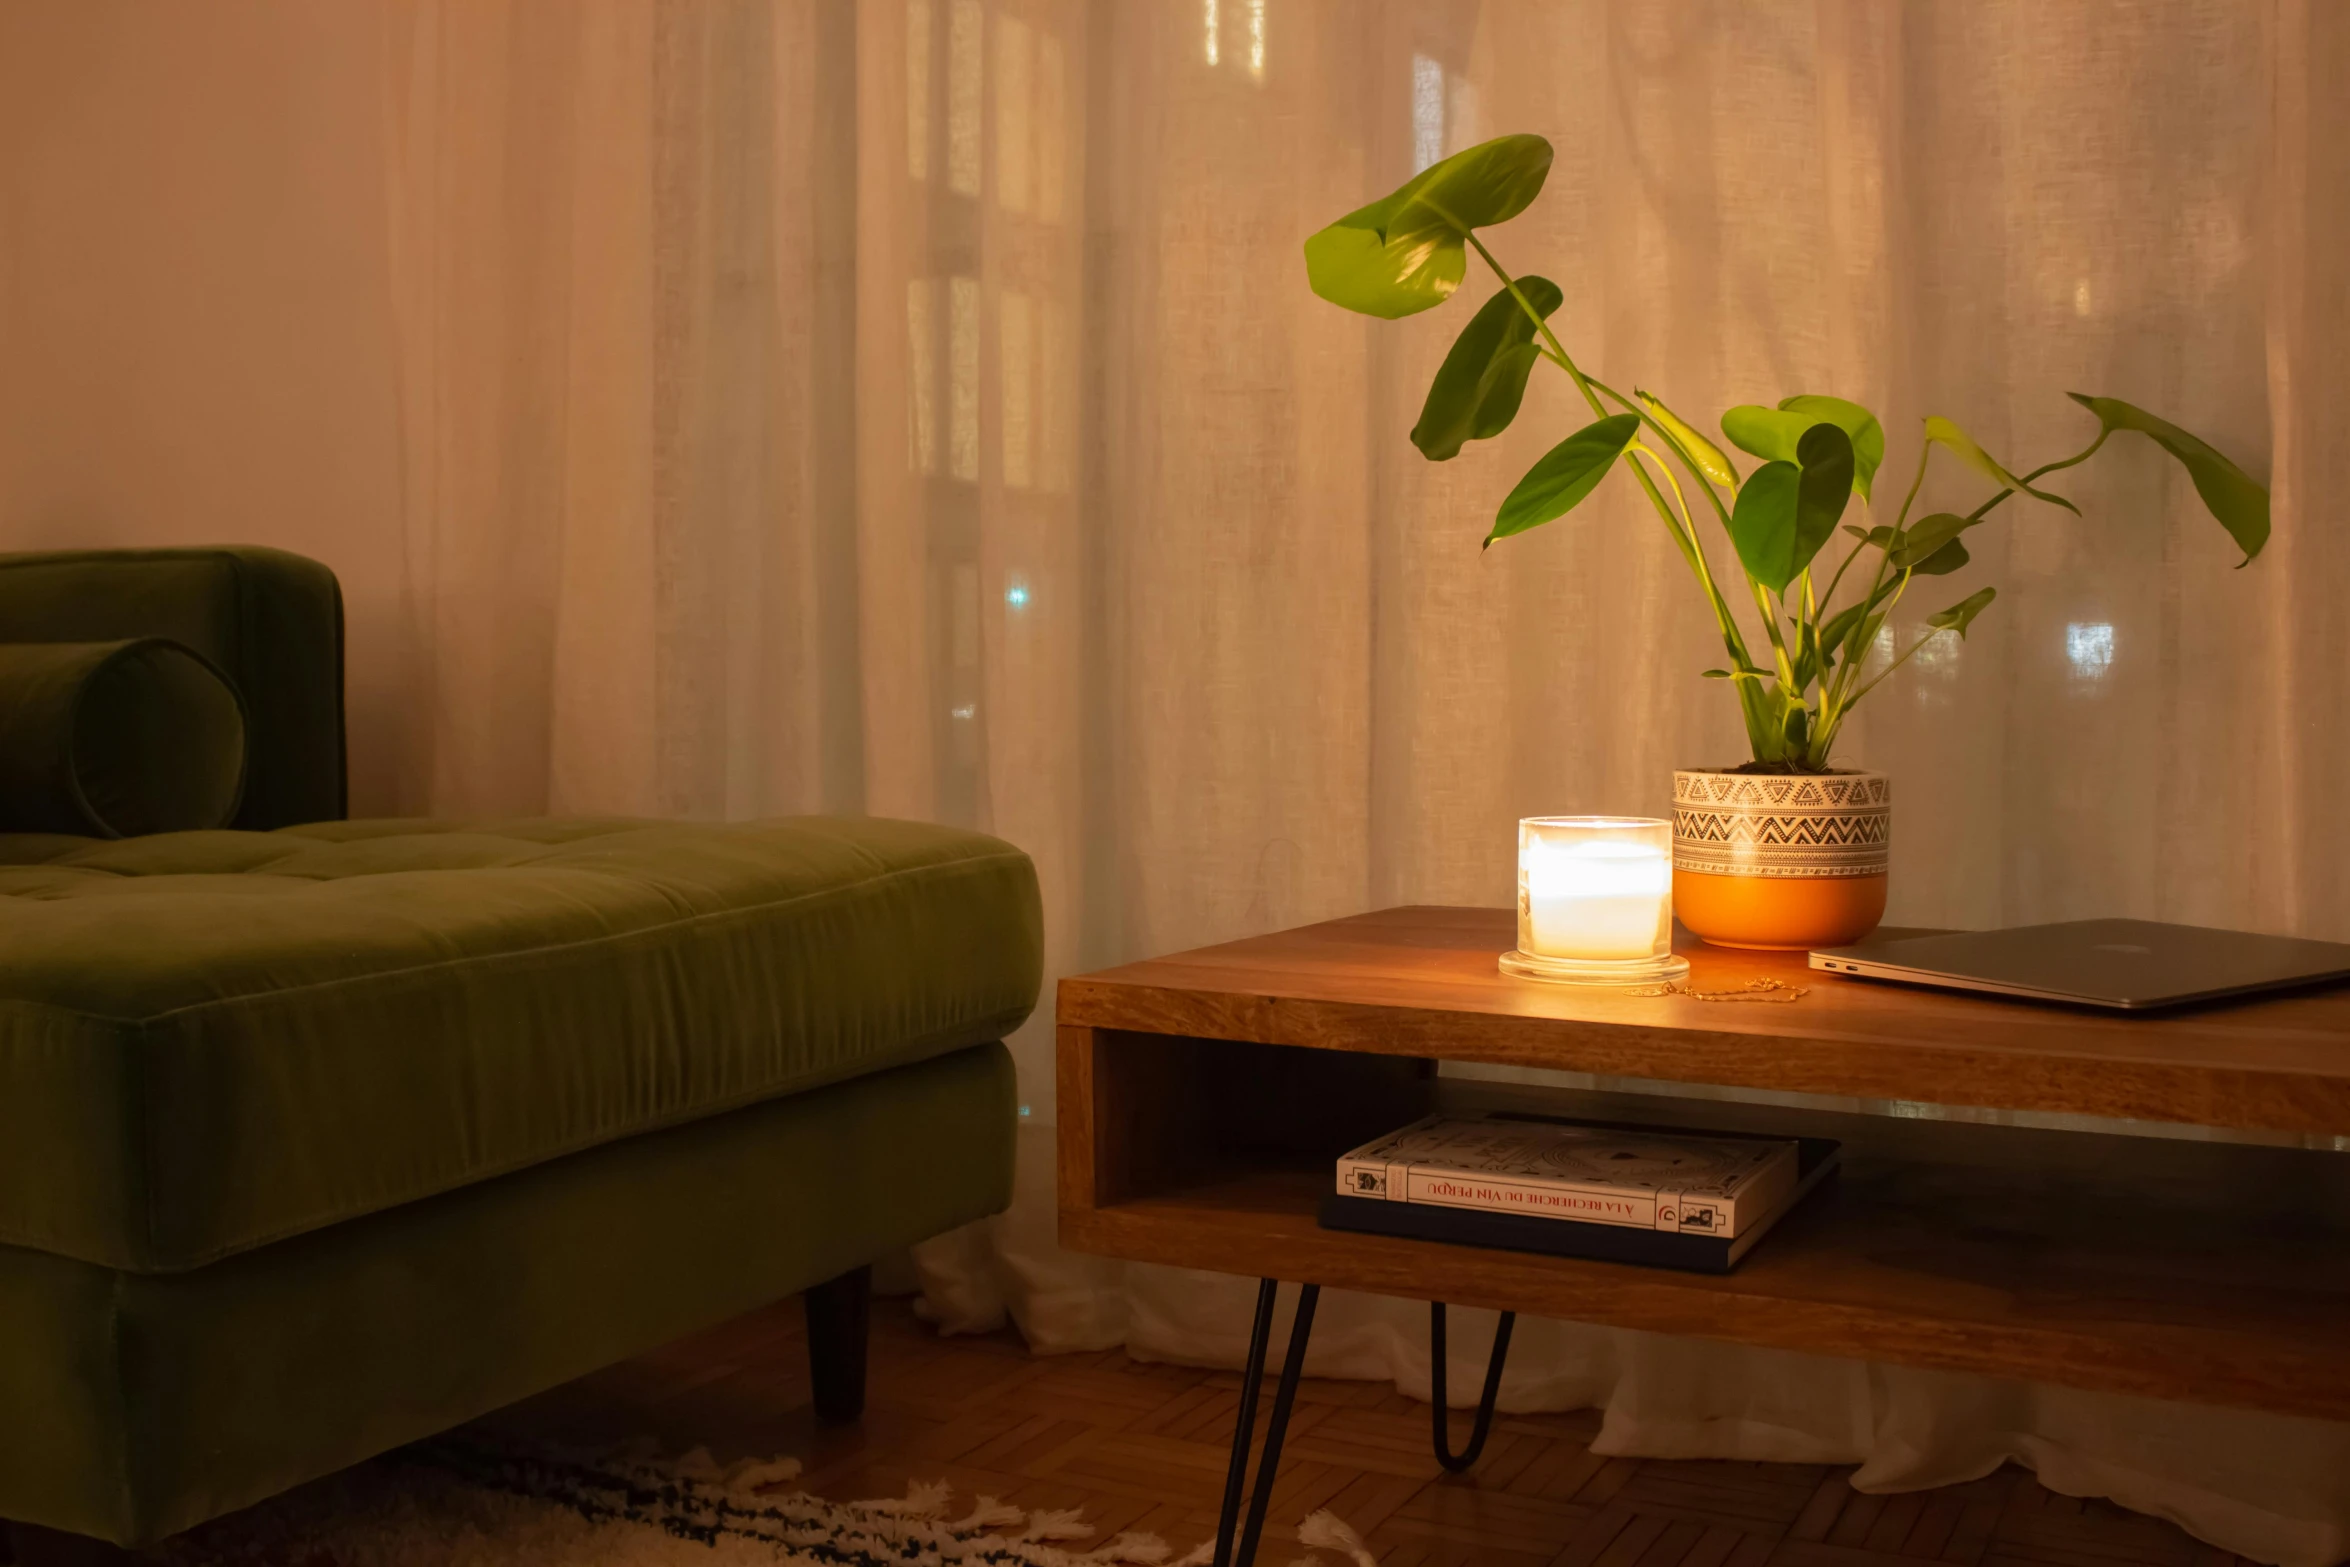 the lamp is next to a large potted plant